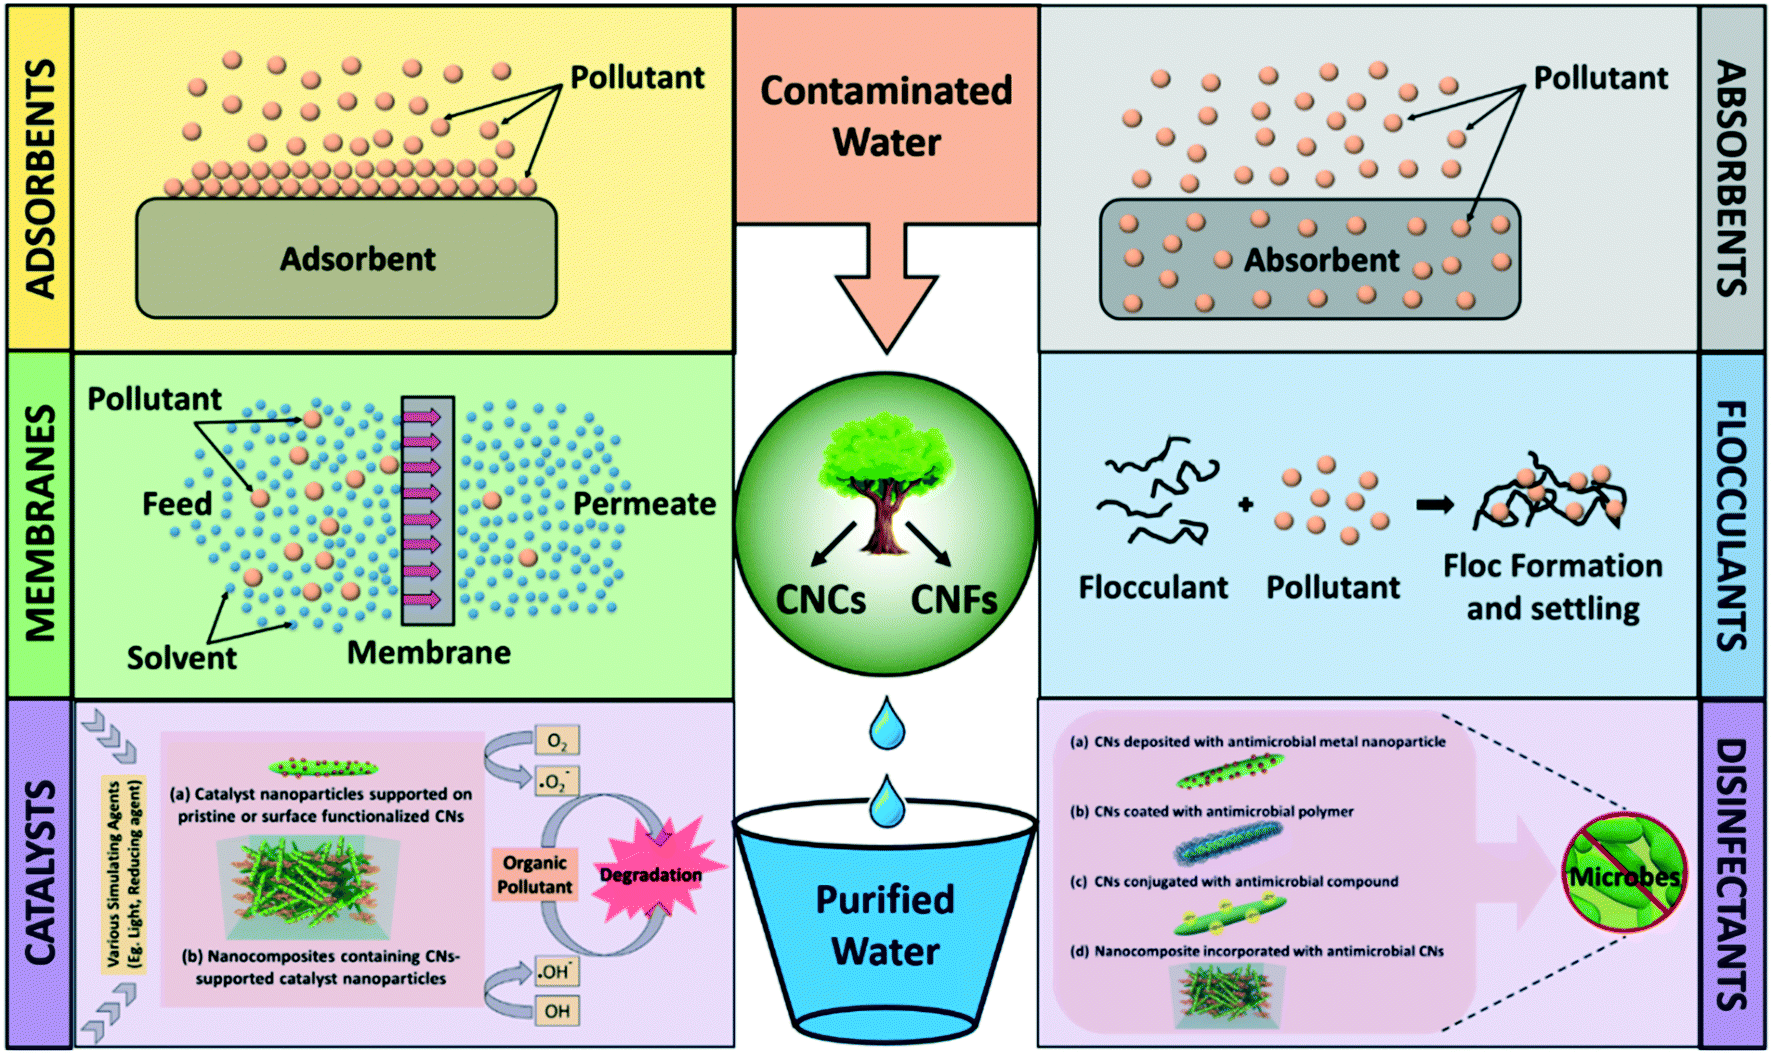 Cellulose nanomaterials: promising sustainable nanomaterials for  application in water/wastewater treatment processes - Environmental  Science: Nano (RSC Publishing) DOI:10.1039/C7EN01029J